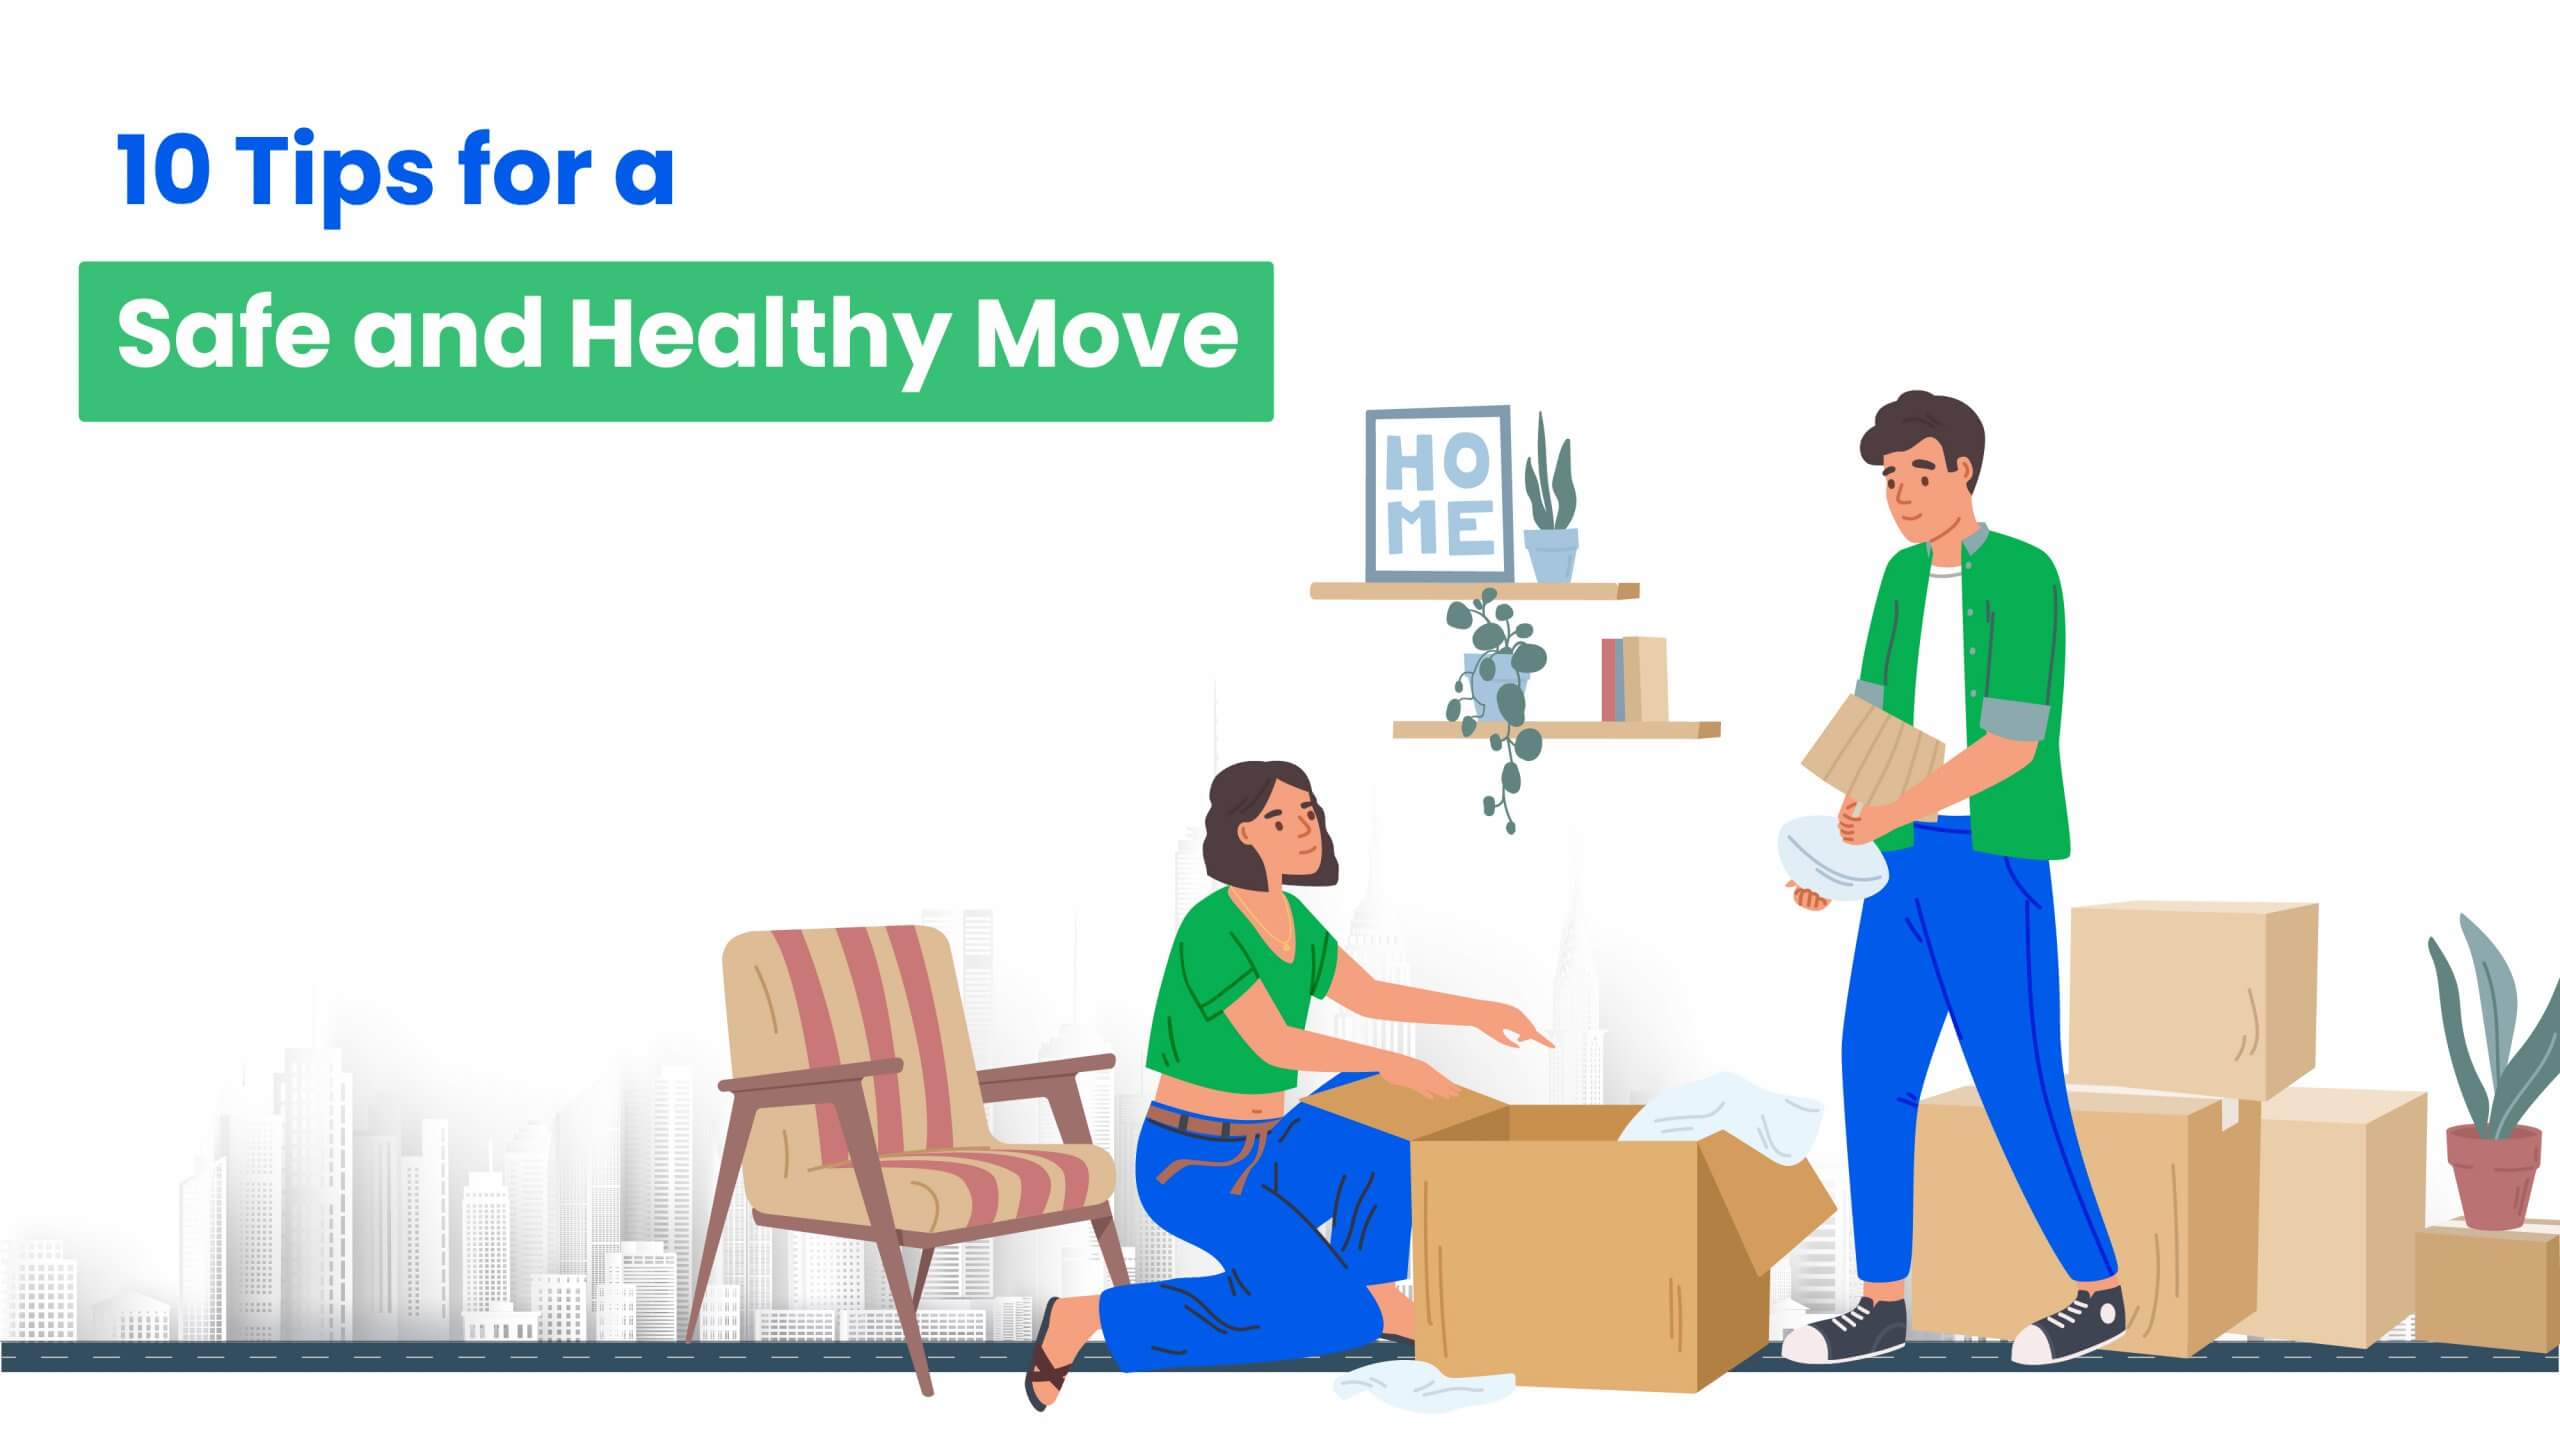 10 Tips for a Safe and Healthy Move